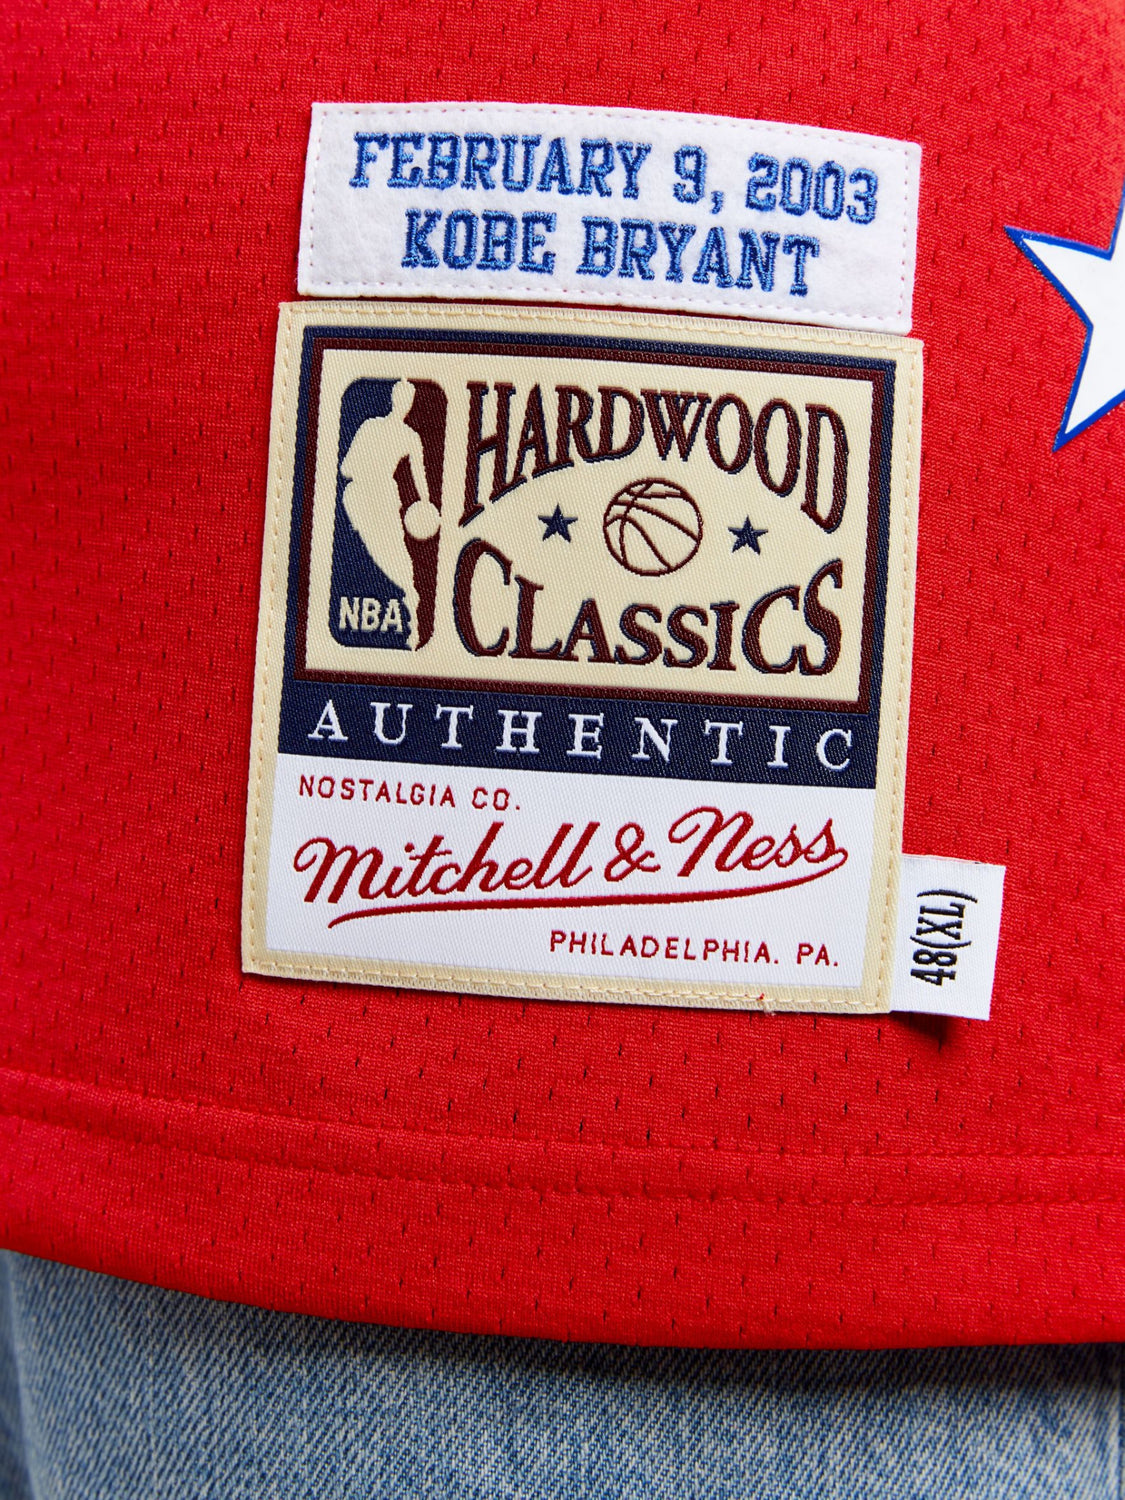 Kobe Bryant Western Conference Mitchell & Ness 2003 All-Star Hardwood  Classics Authentic Jersey - Red